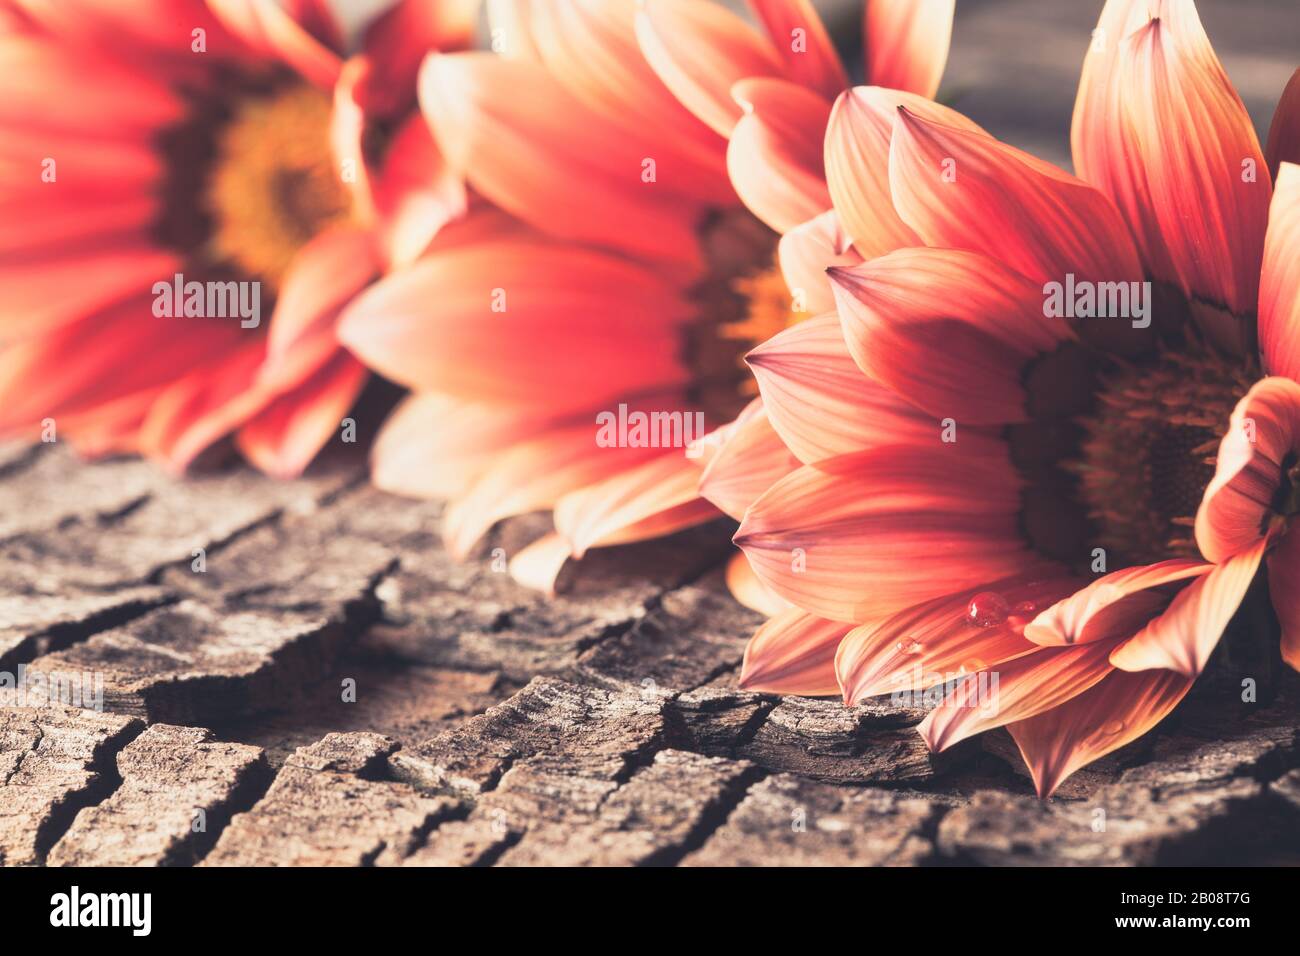 still life with cut flowers Stock Photo